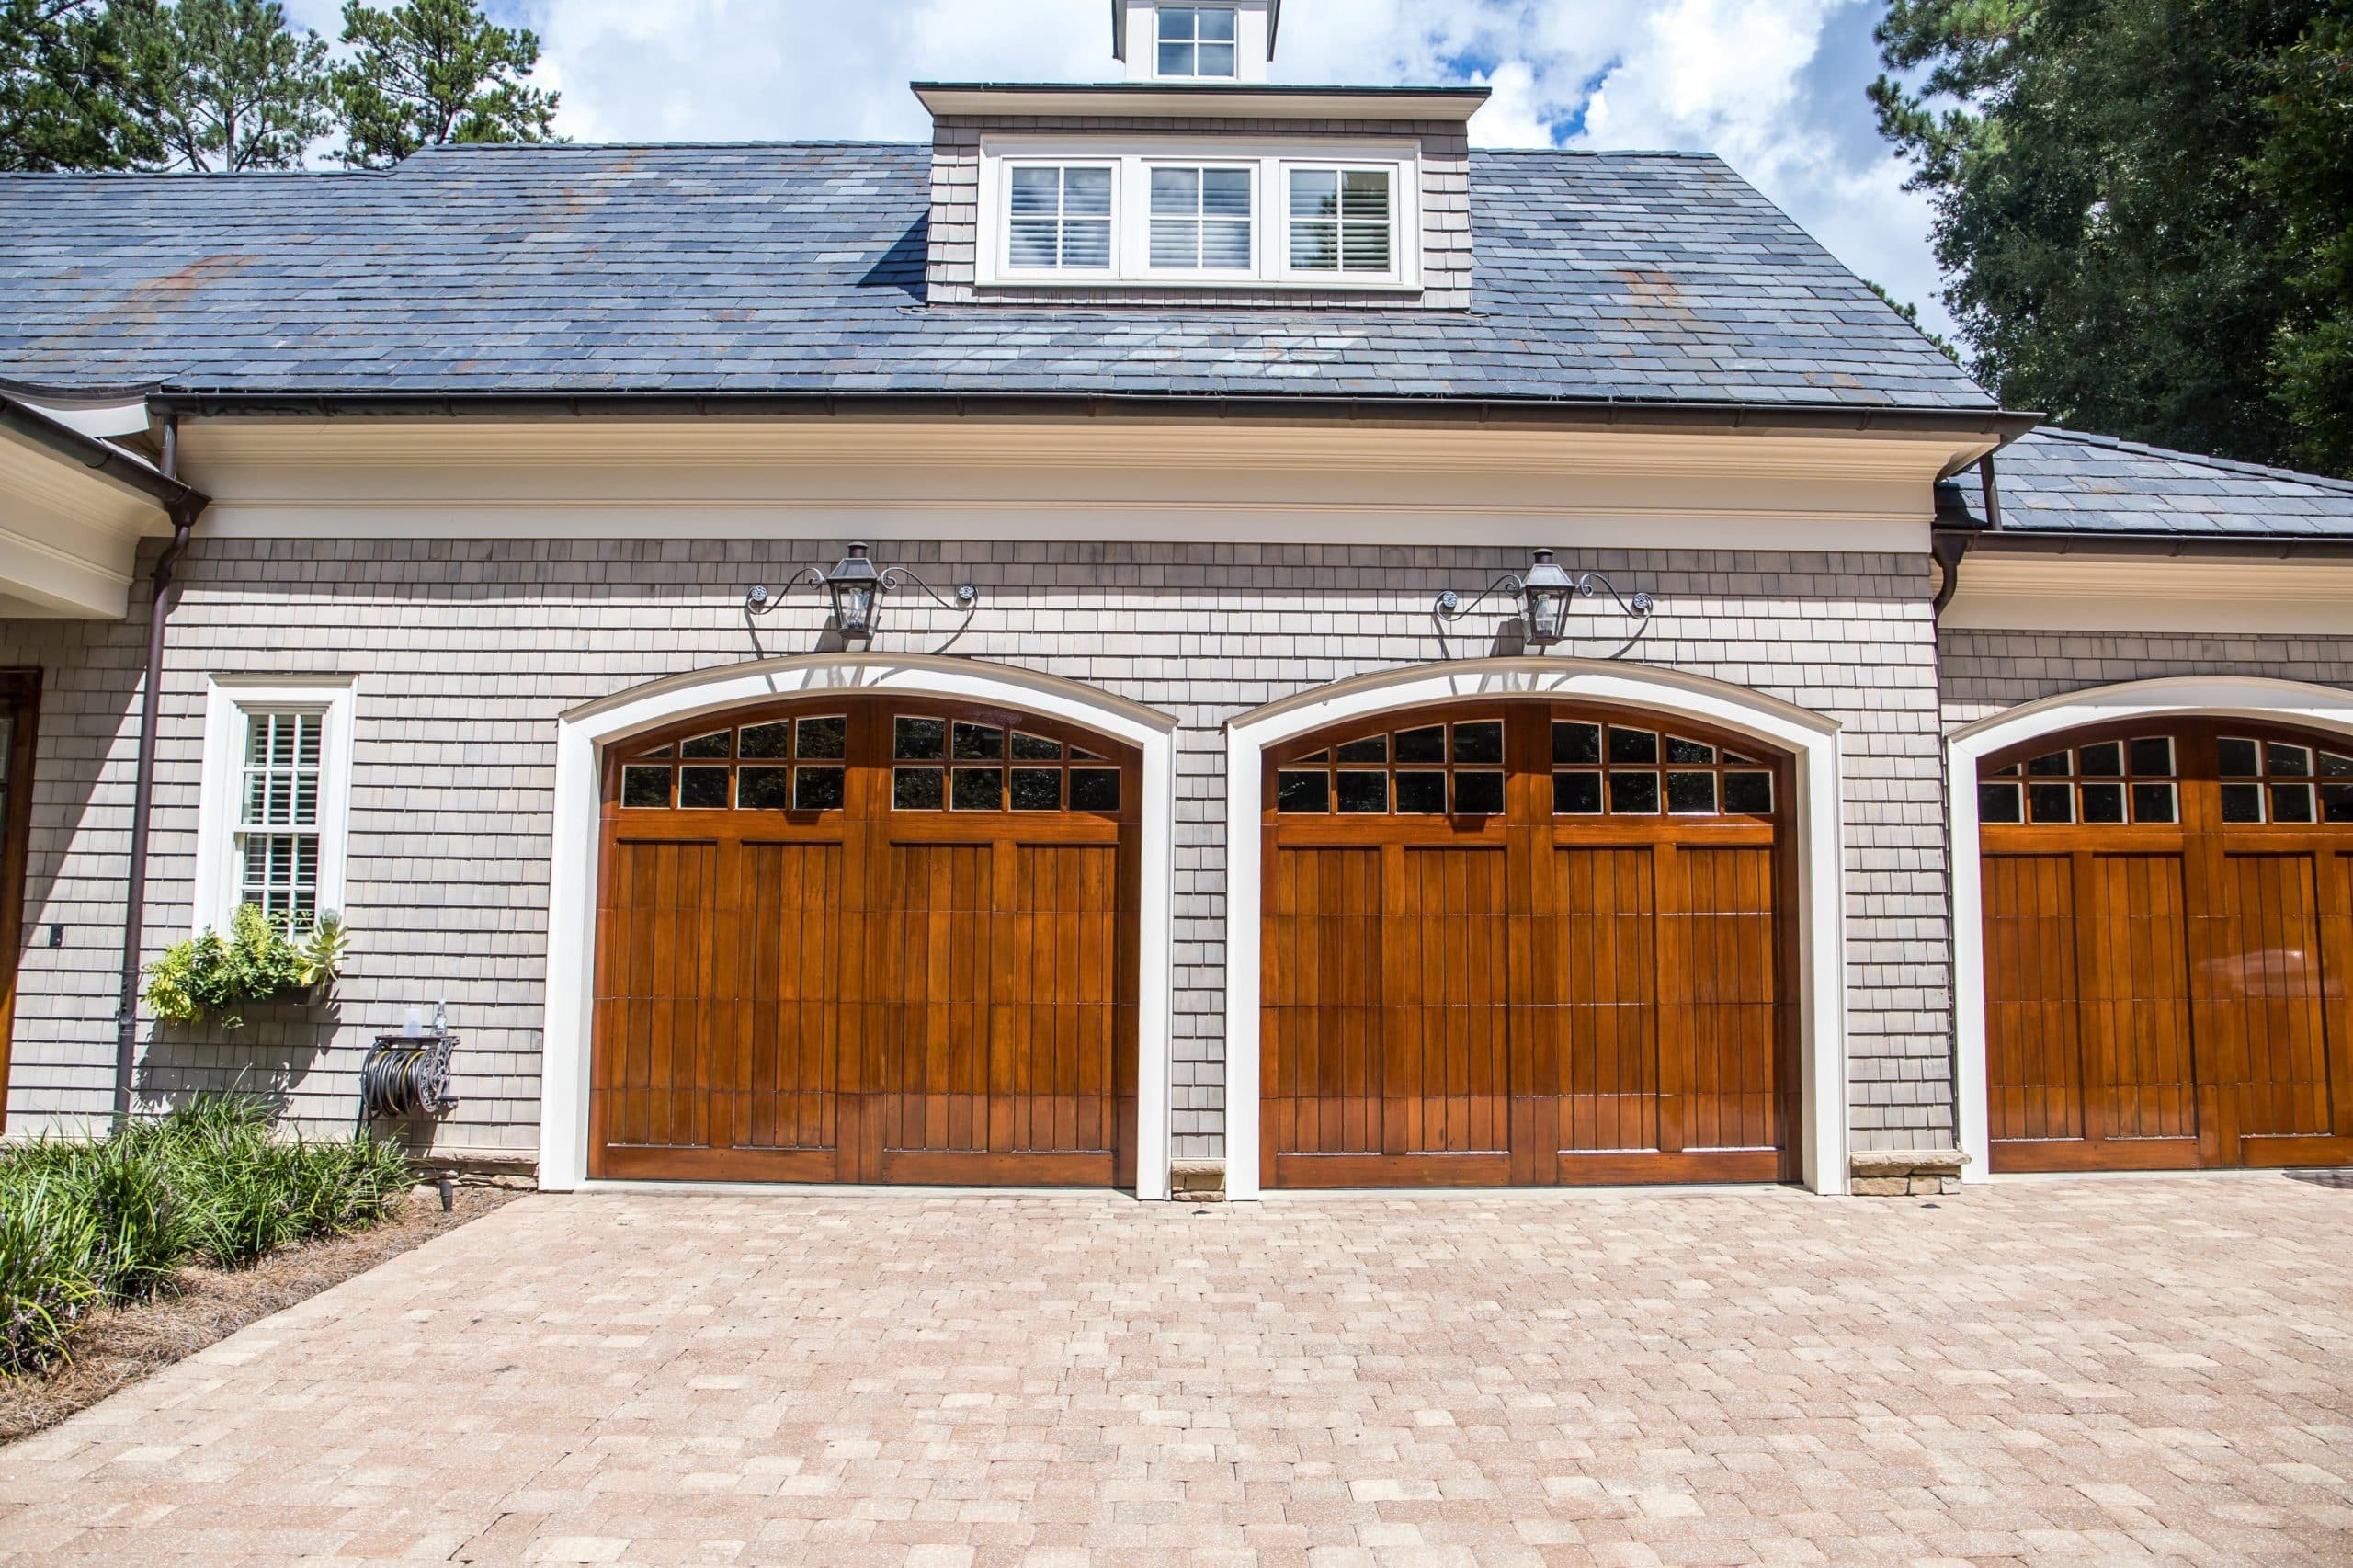 New How Much Do Wooden Garage Doors Cost for Large Space